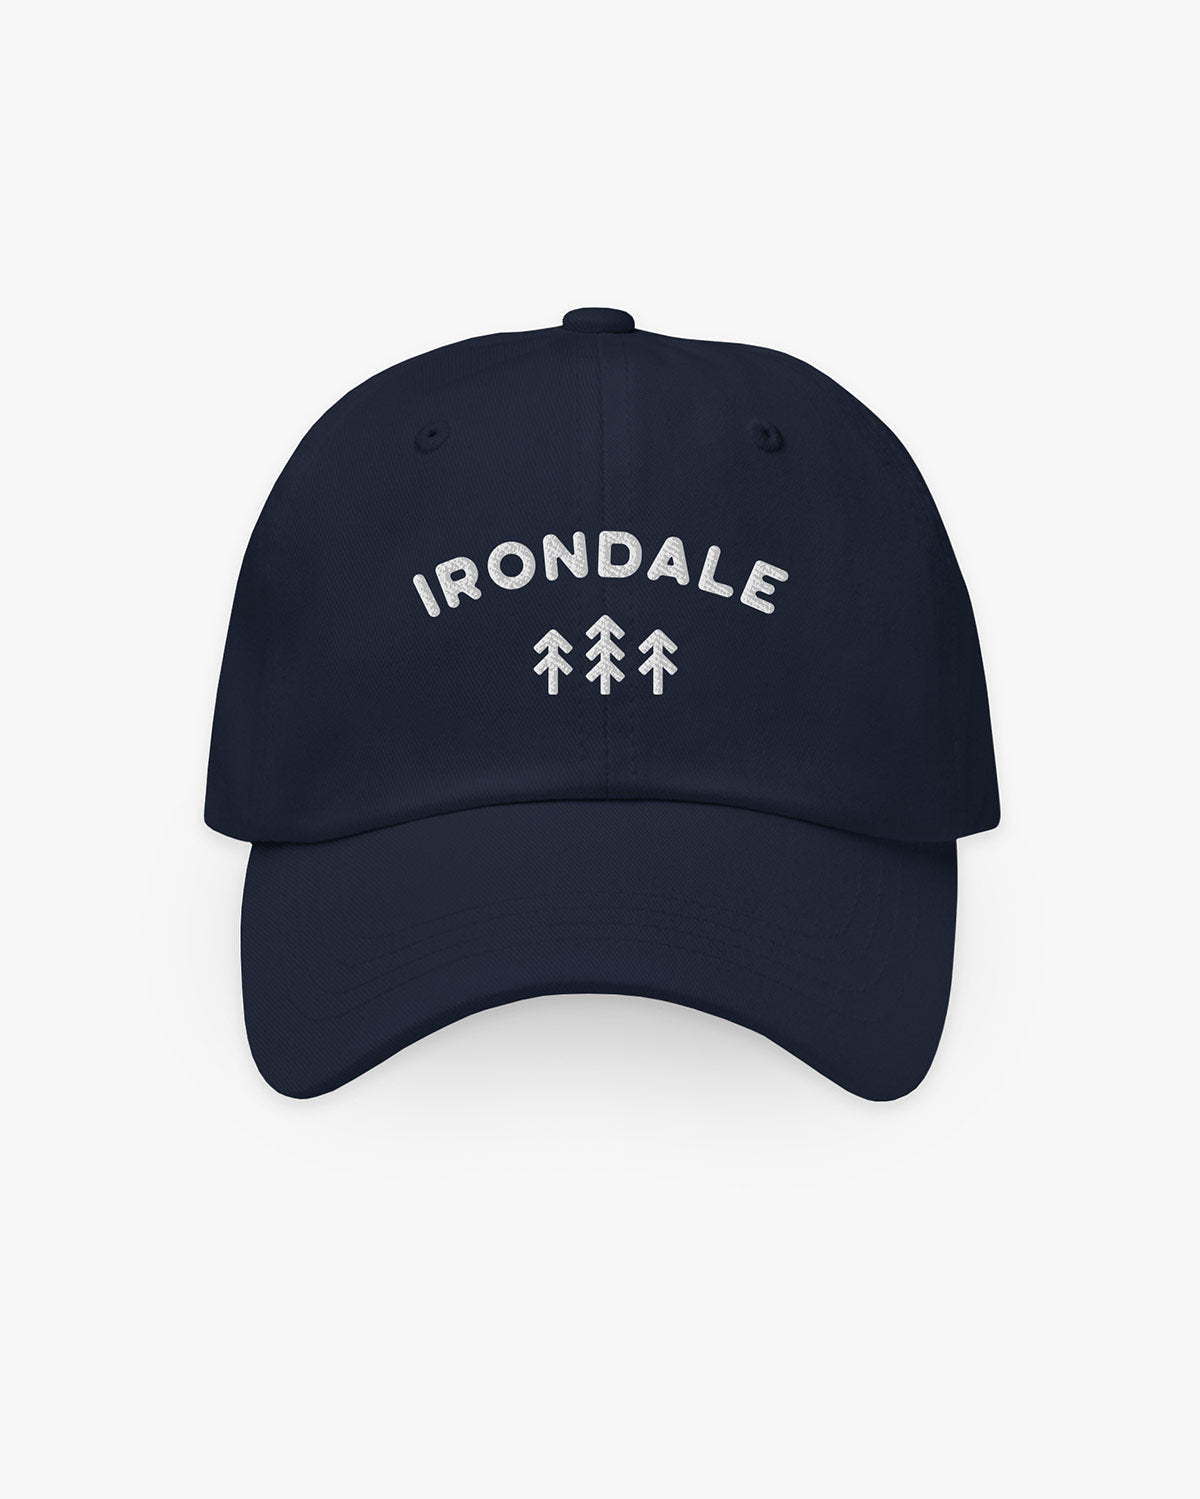 Trees - Irondale - Hat